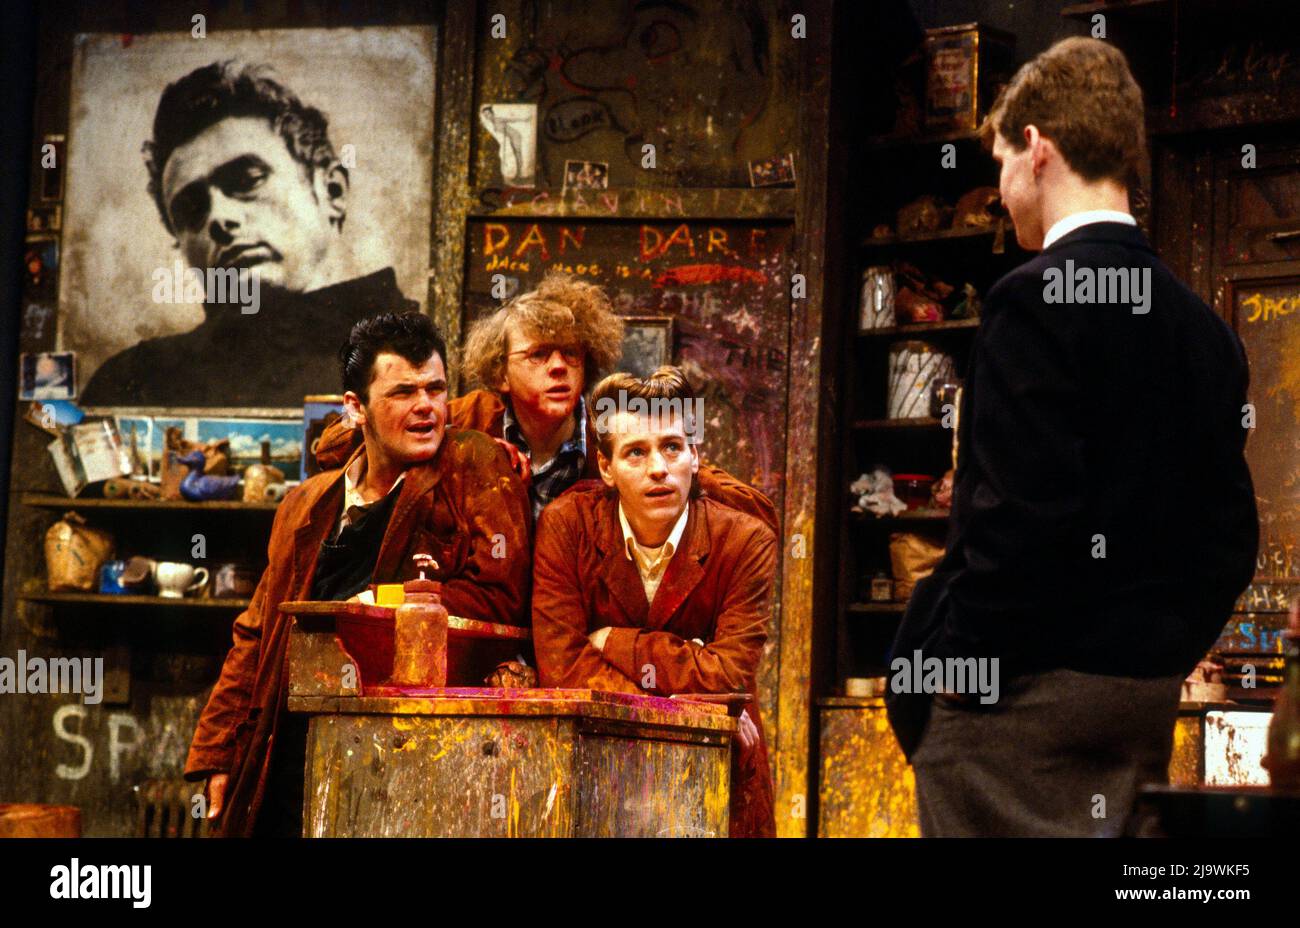 l-r: Gerard Kelly (Spanky Farrell), Iain Andrew (Hector McKenzie), Billy McColl (Phil McCann), Nicholas Sherry (Alan Downie) in PAISLEY PATTERNS part 1 of THE SLAB BOYS TRILOGY by John Byrne at the Royal Court Theatre, London SW1  18/11/1982  a Traverse Theatre Company production  design: John Byrne  lighting: Colin Scott  director: David Hayman Stock Photo